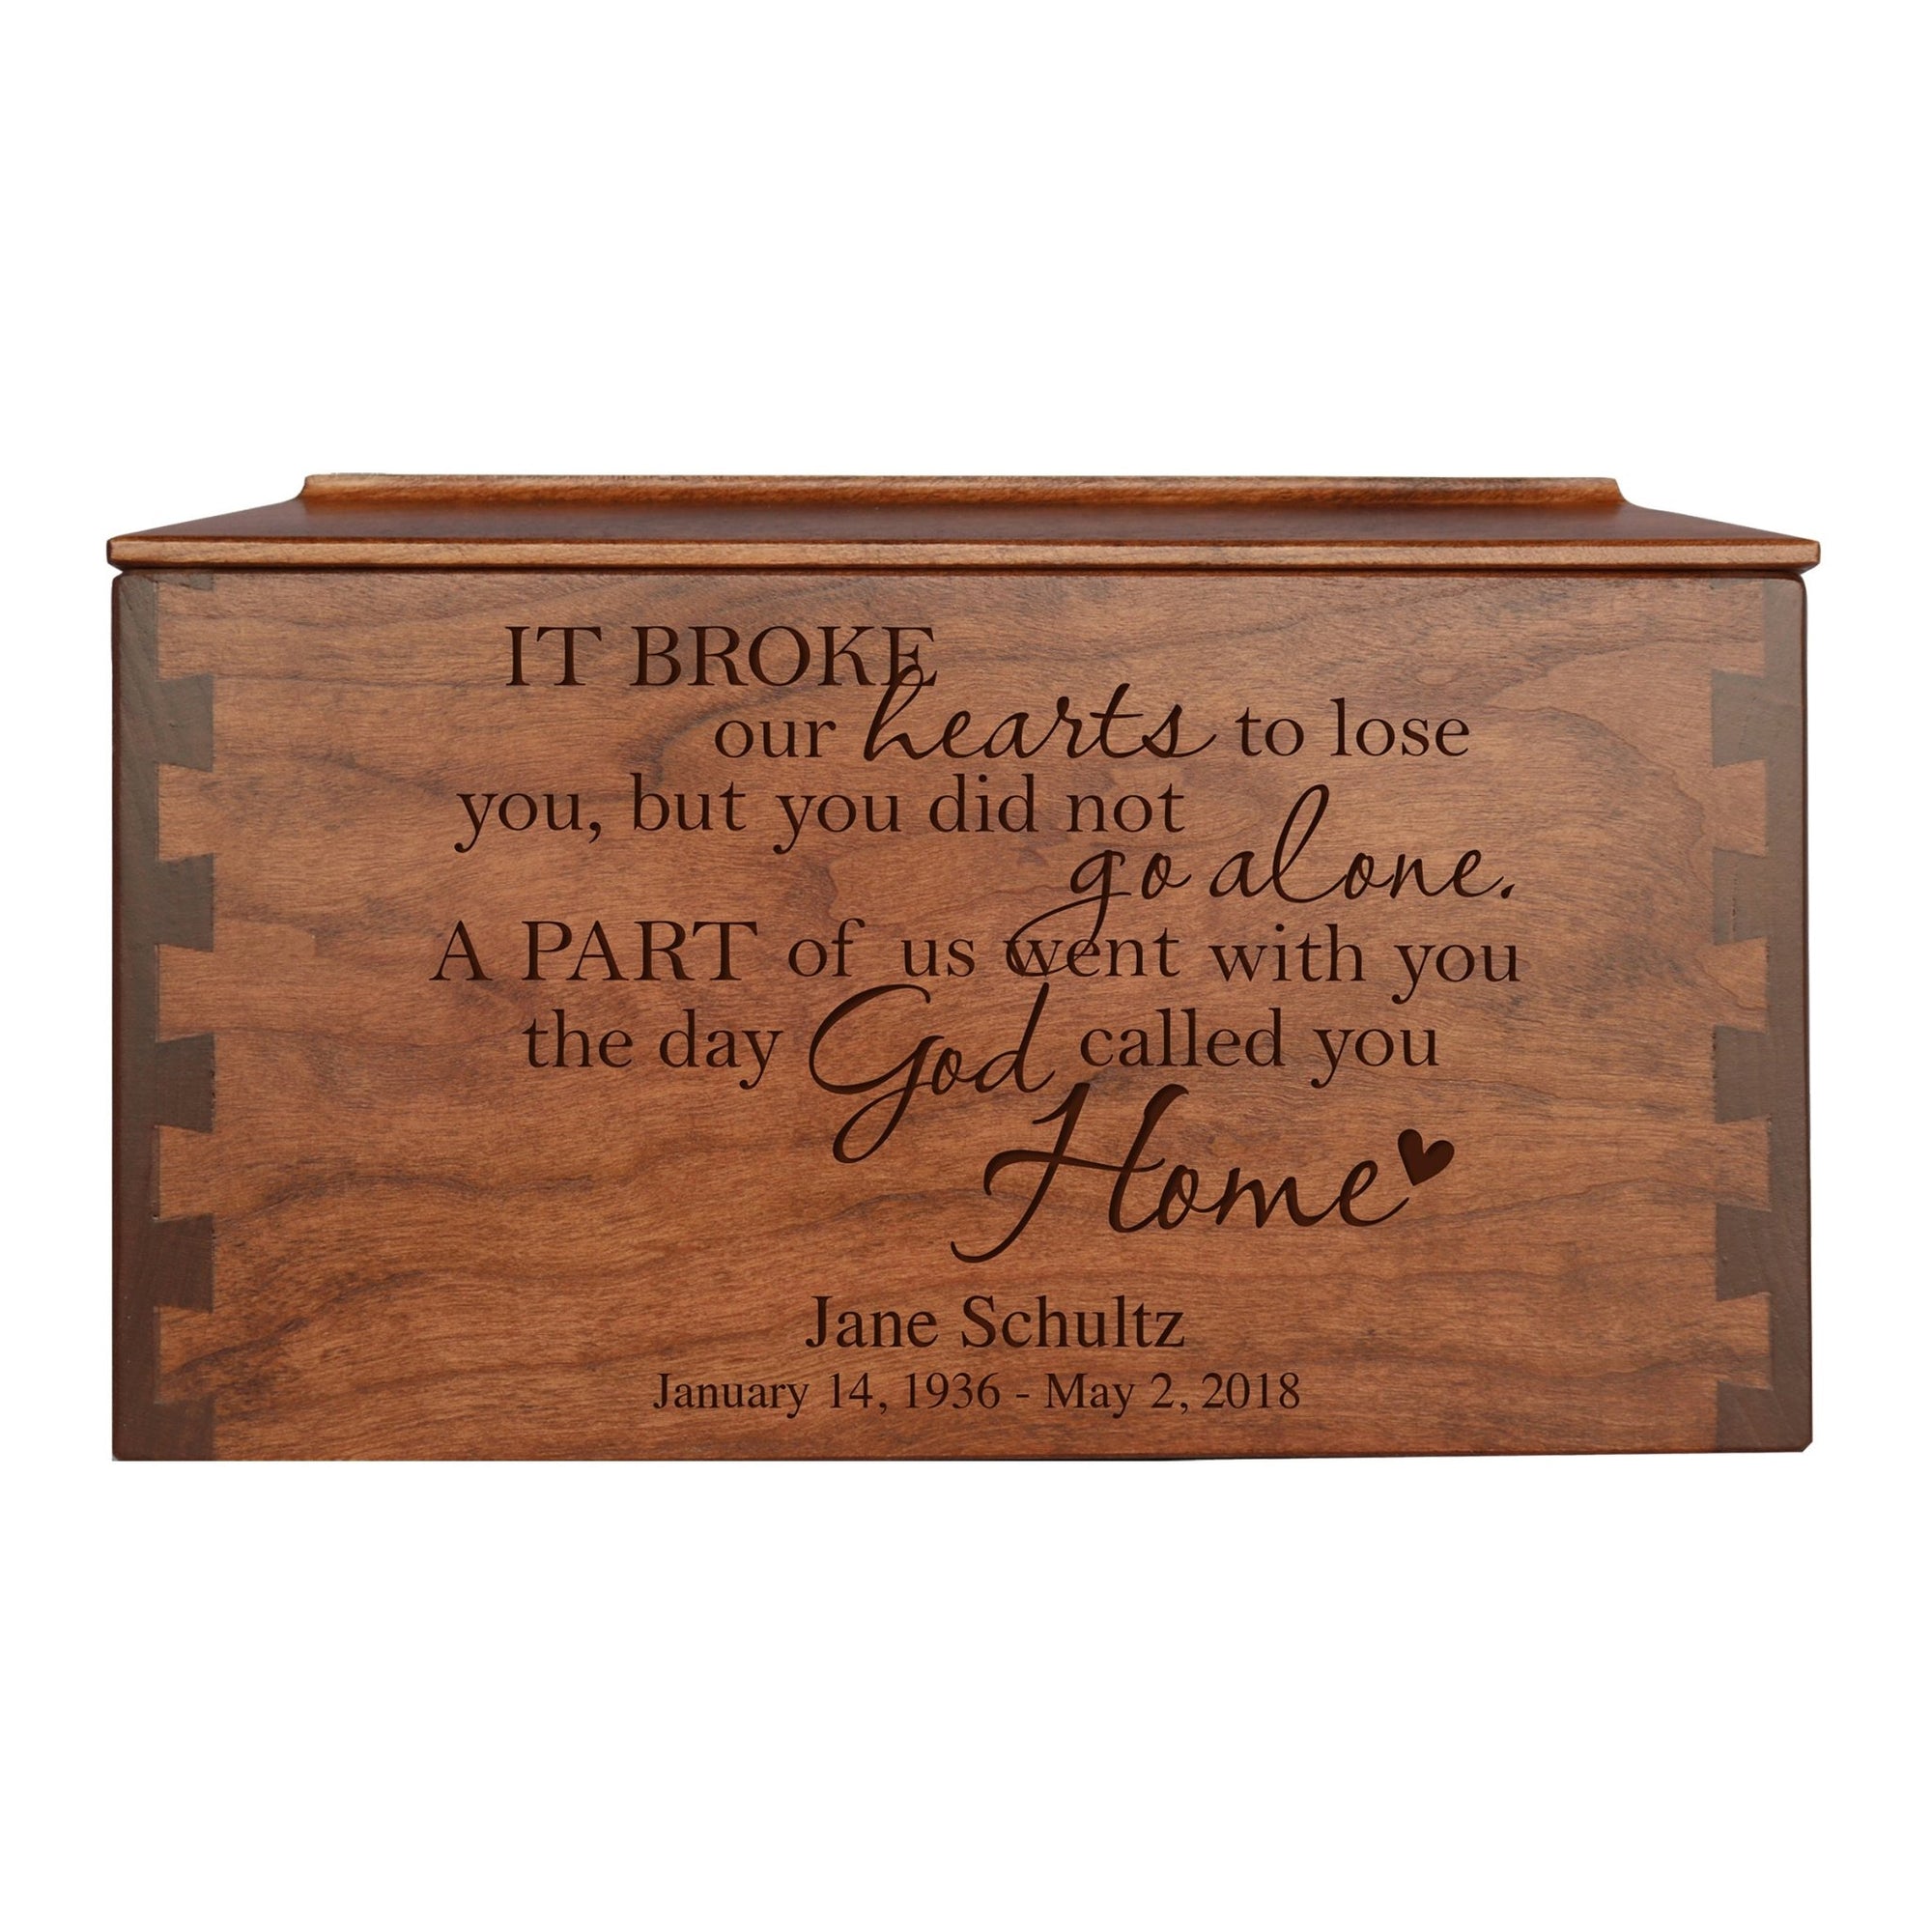 Custom Wooden Cremation Urn Box Large for Human Ashes holds 291 cu in It Broke Our Hearts - LifeSong Milestones